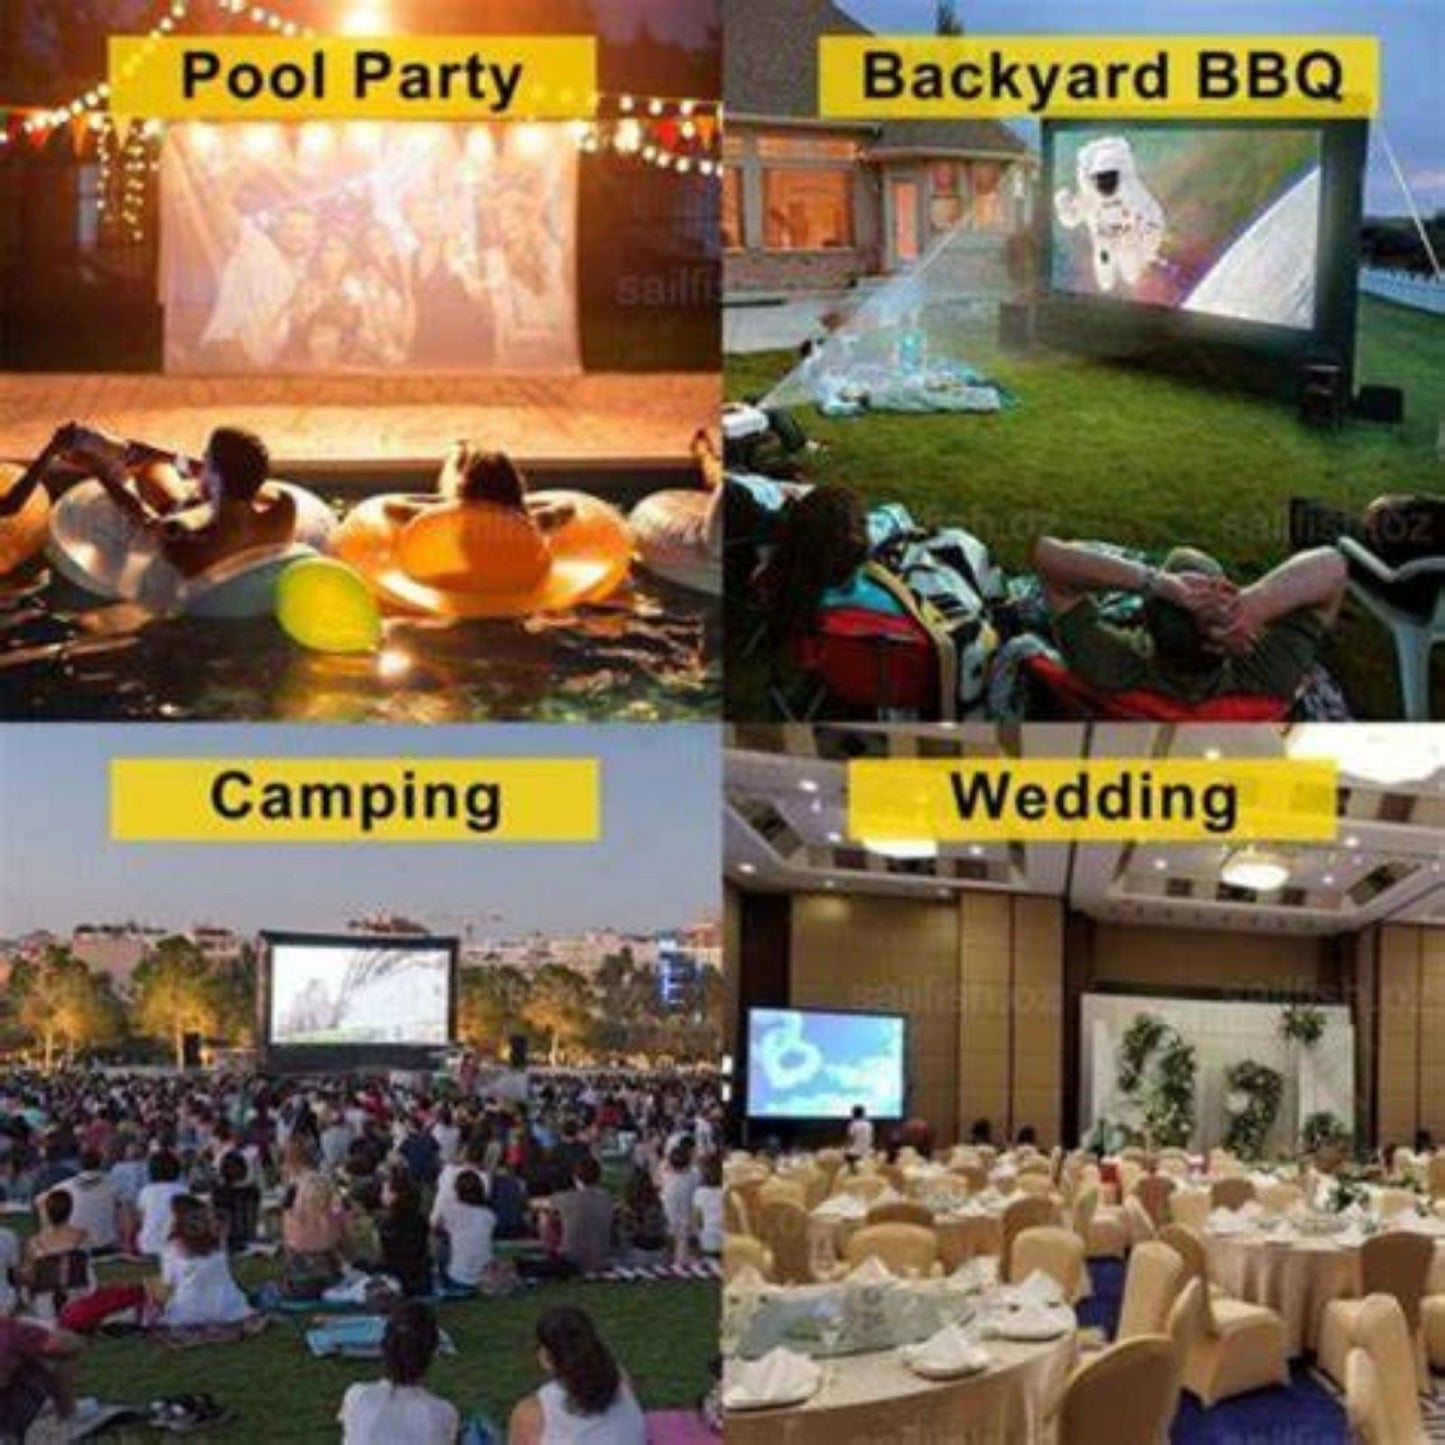 Inflatable Projector Screen 14ft for Front and Rear Projection Blow up Mega Movie Screen for Outdoor Movies Storage Bag and Blower